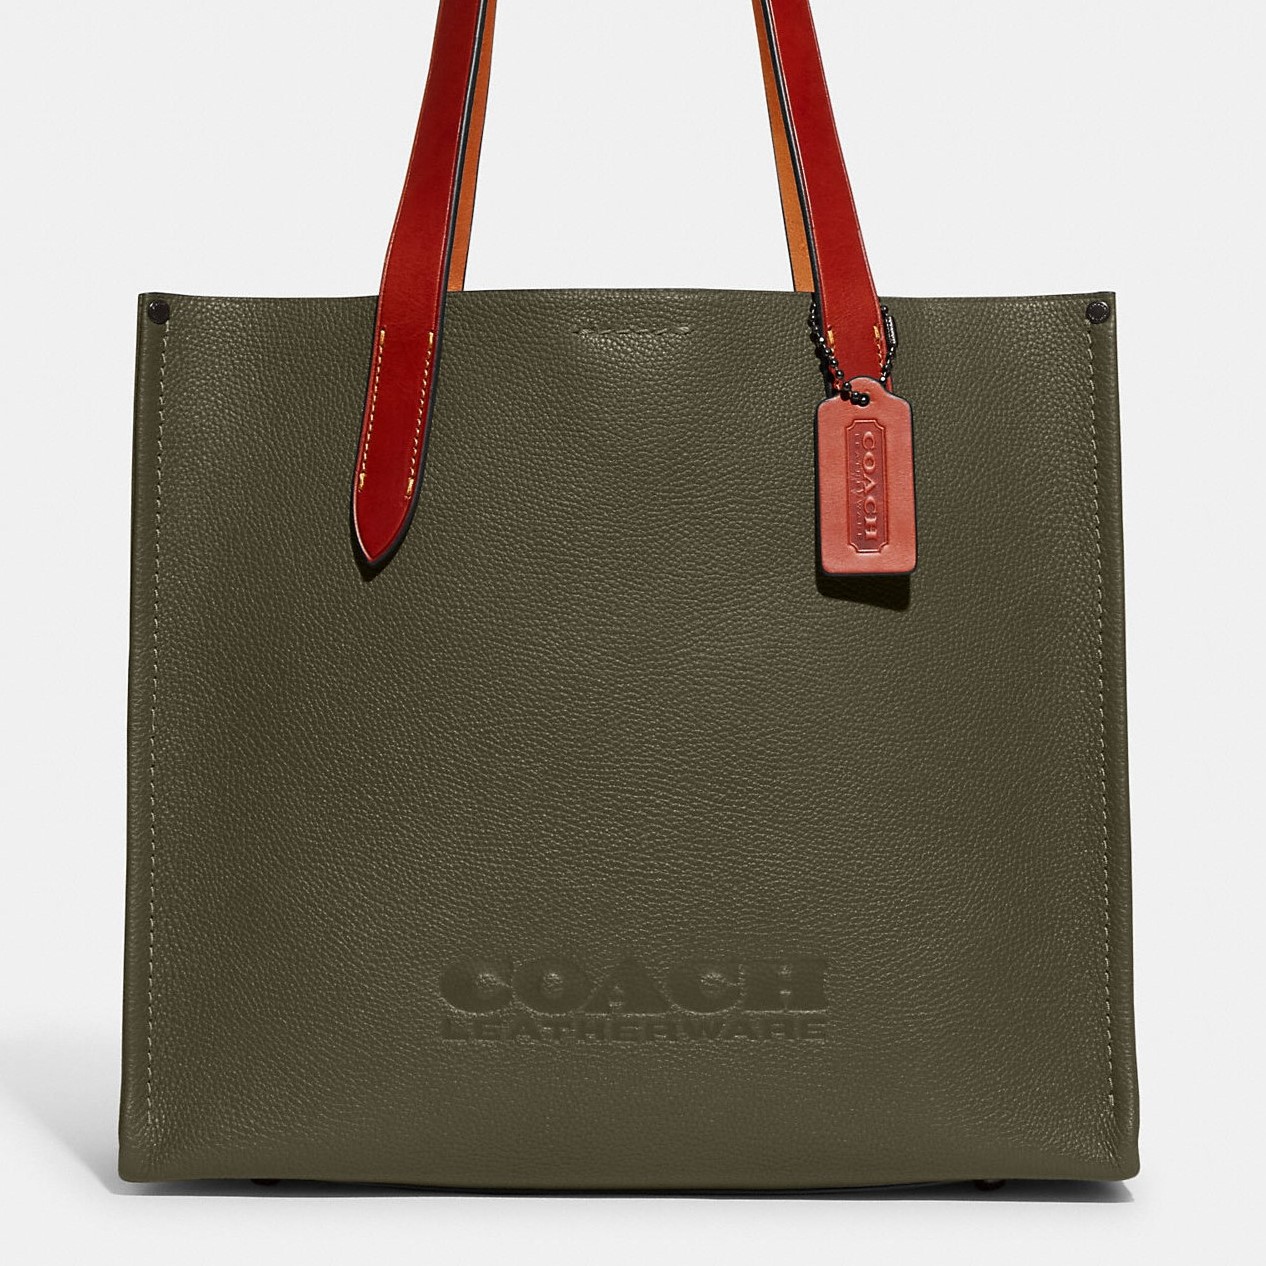 TÚI TOTE COACH RELAY TOTE 34 POLISHED PEBBLE LEATHER BAG CH757 12